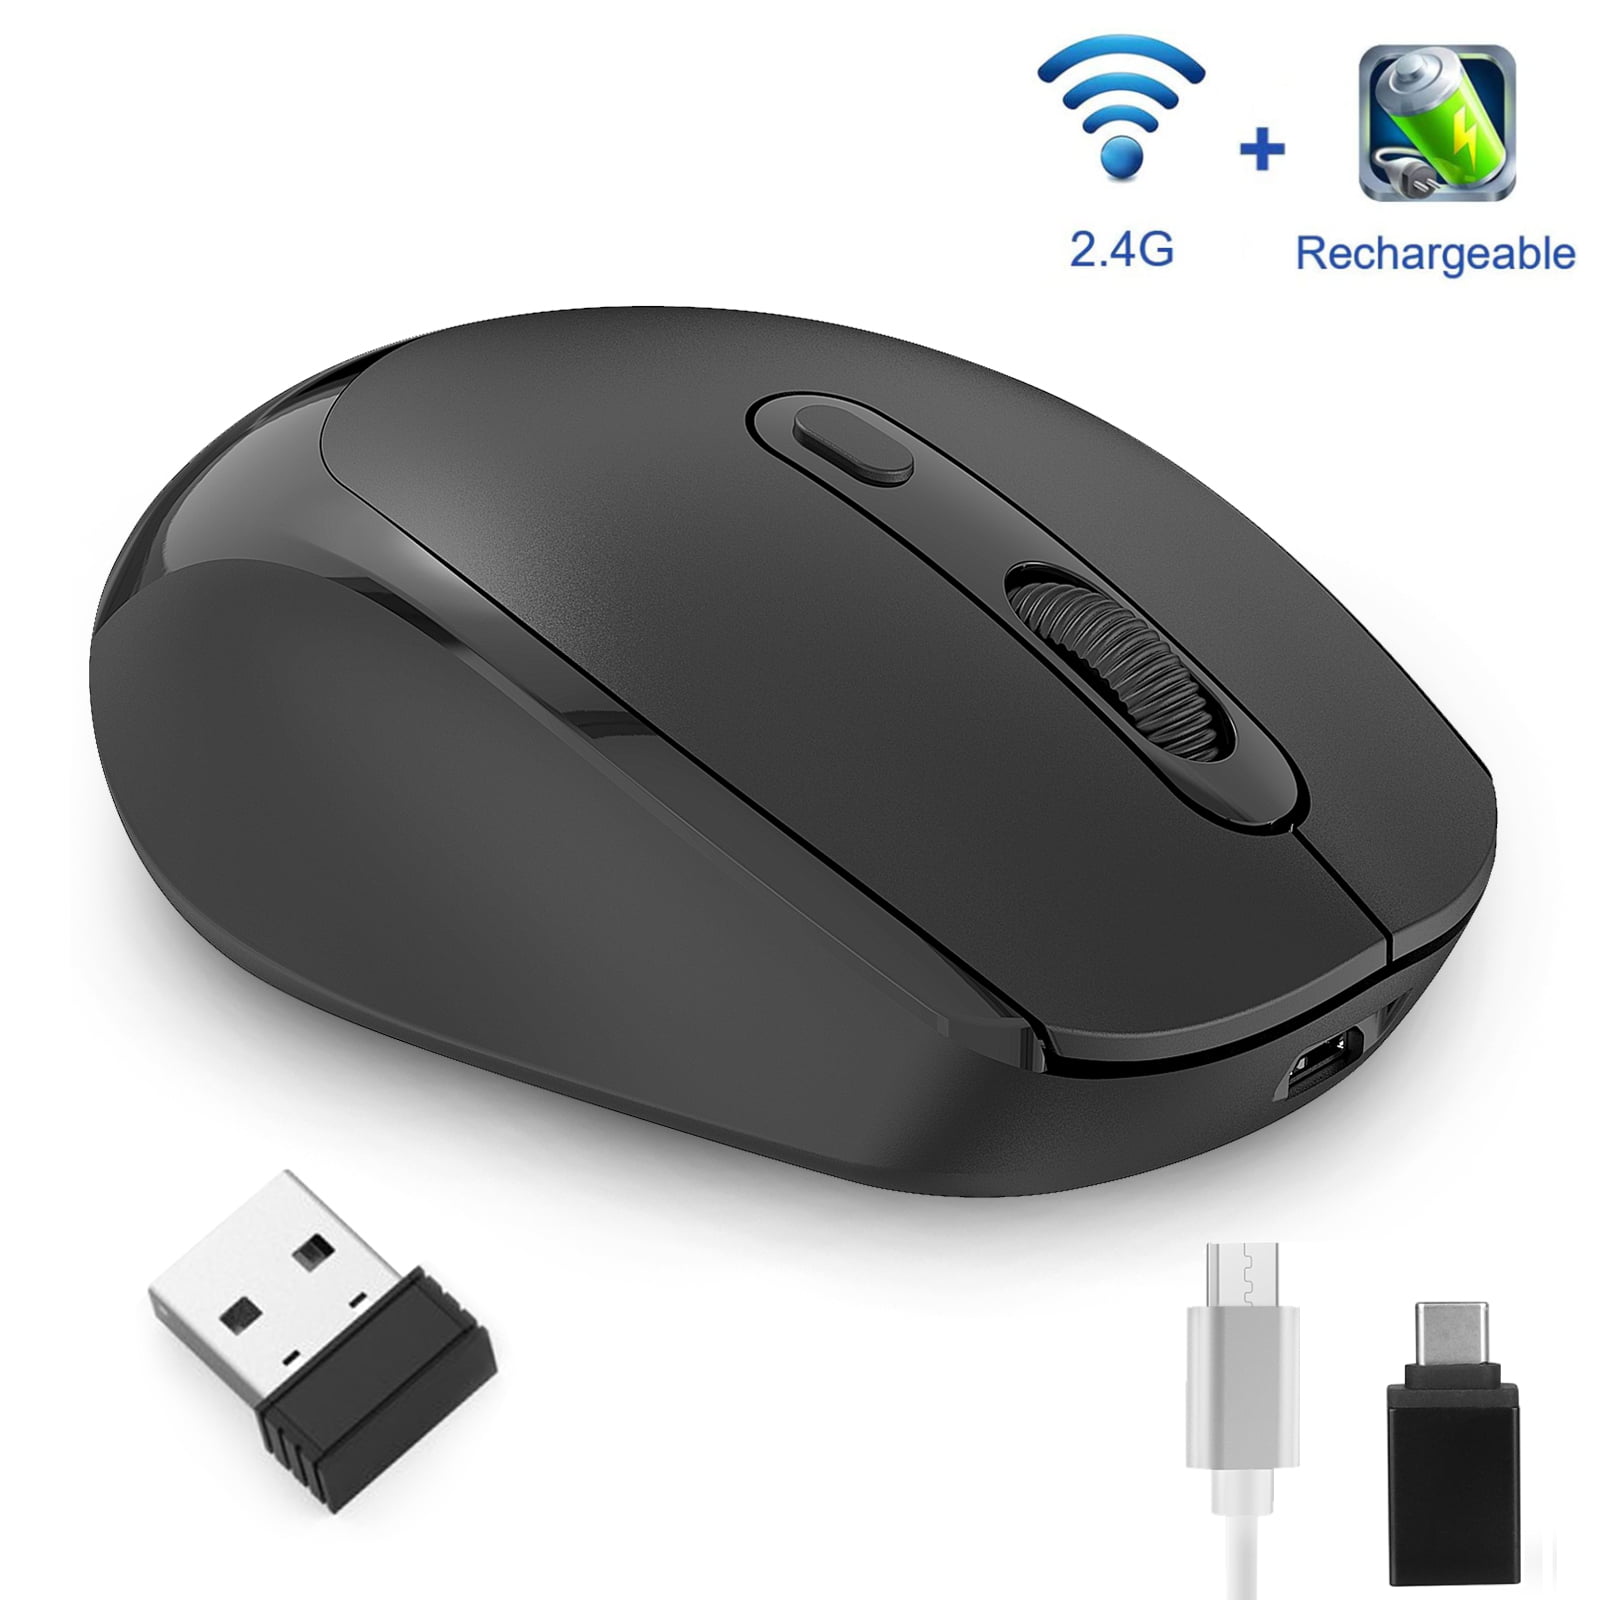 Slim 2.4 GHz USB Optical Wireless Cordless Scroll Mouse for Mac PC Laptop iMac 